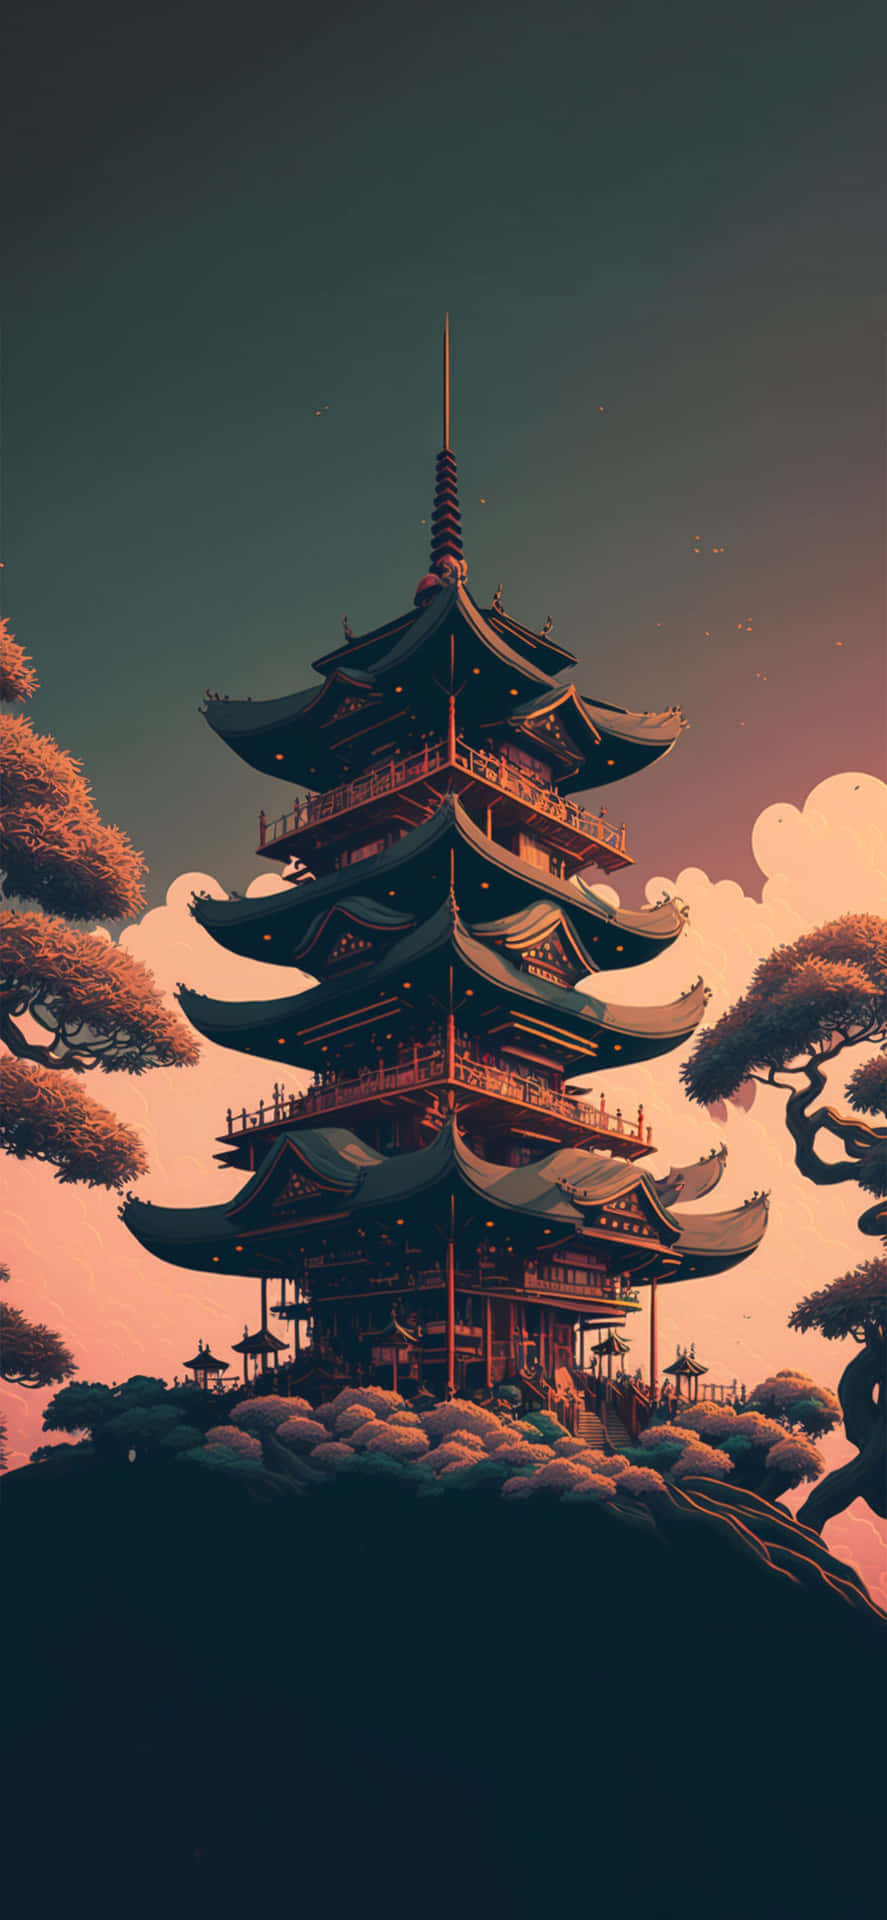 A Pagoda On A Hill With Trees In The Background